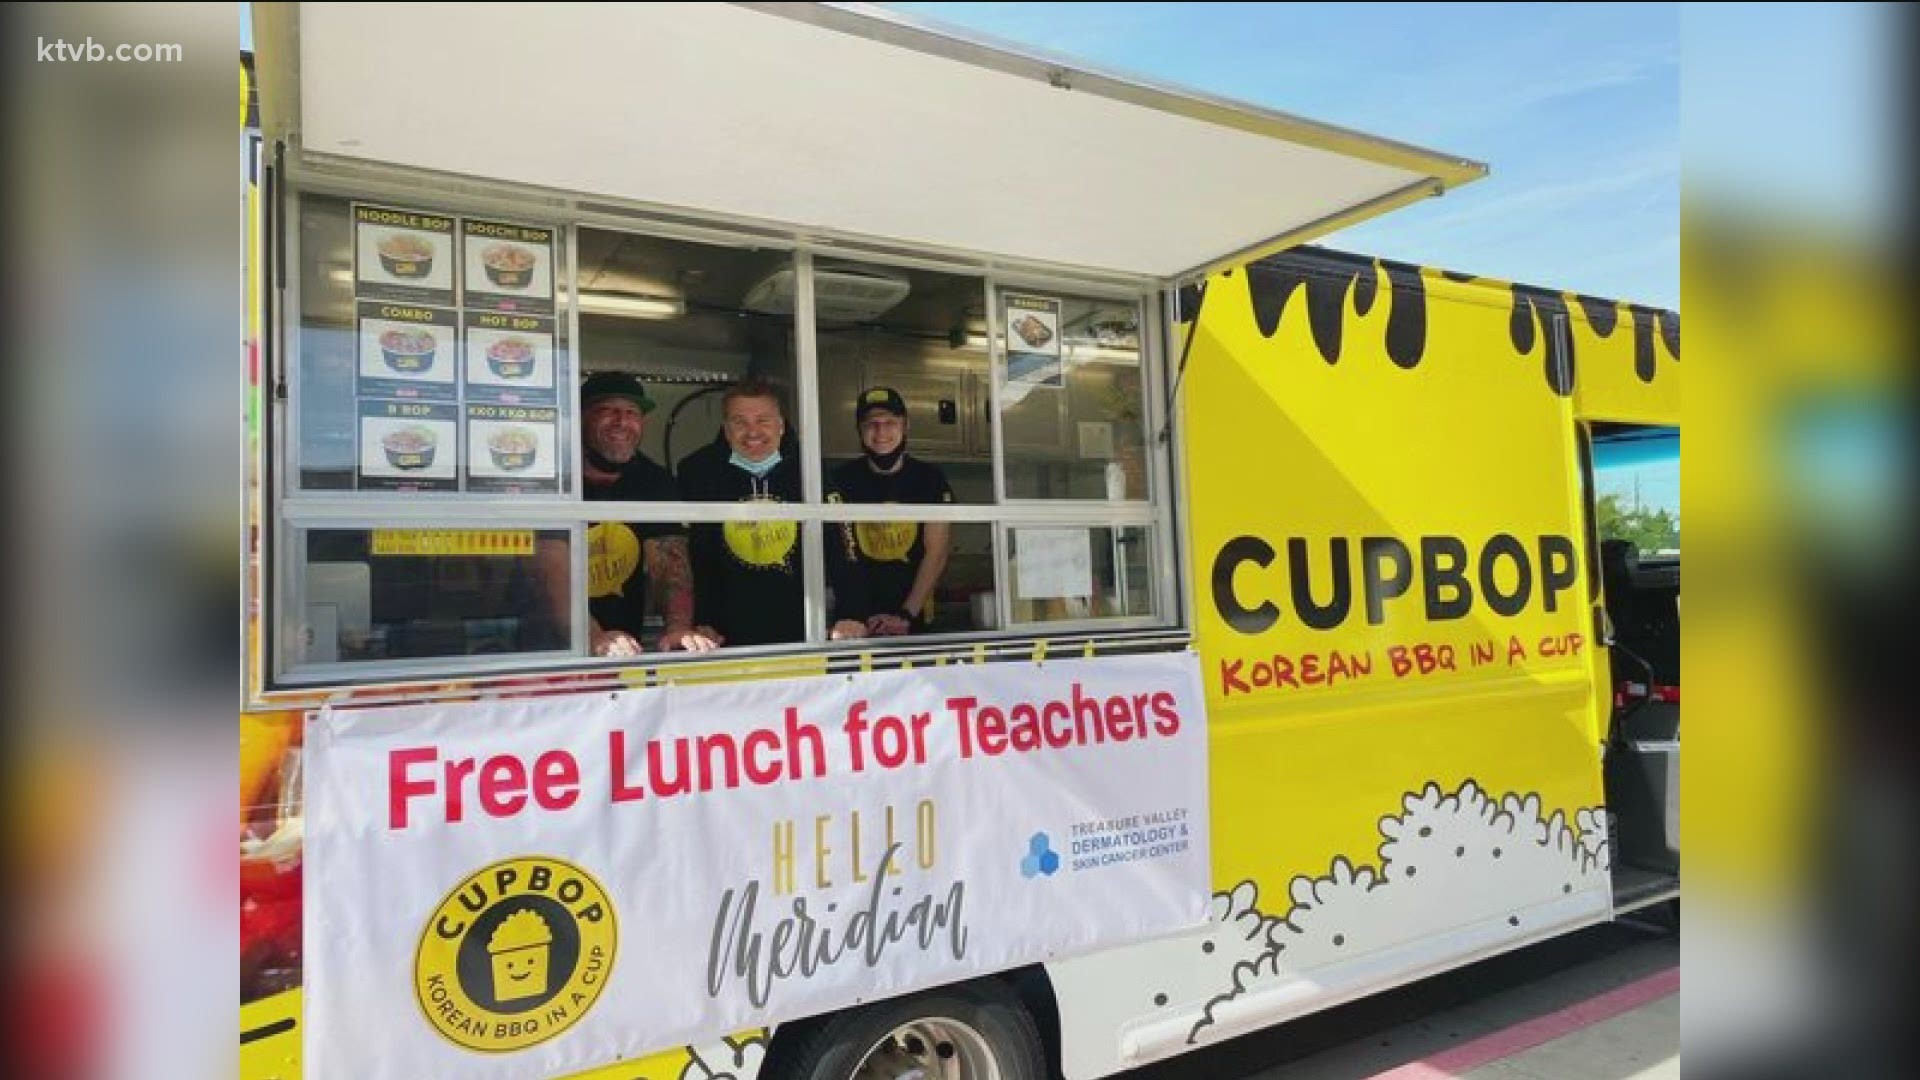 Hello Meridian is working to line up sponsors and locations for these weekly lunches.